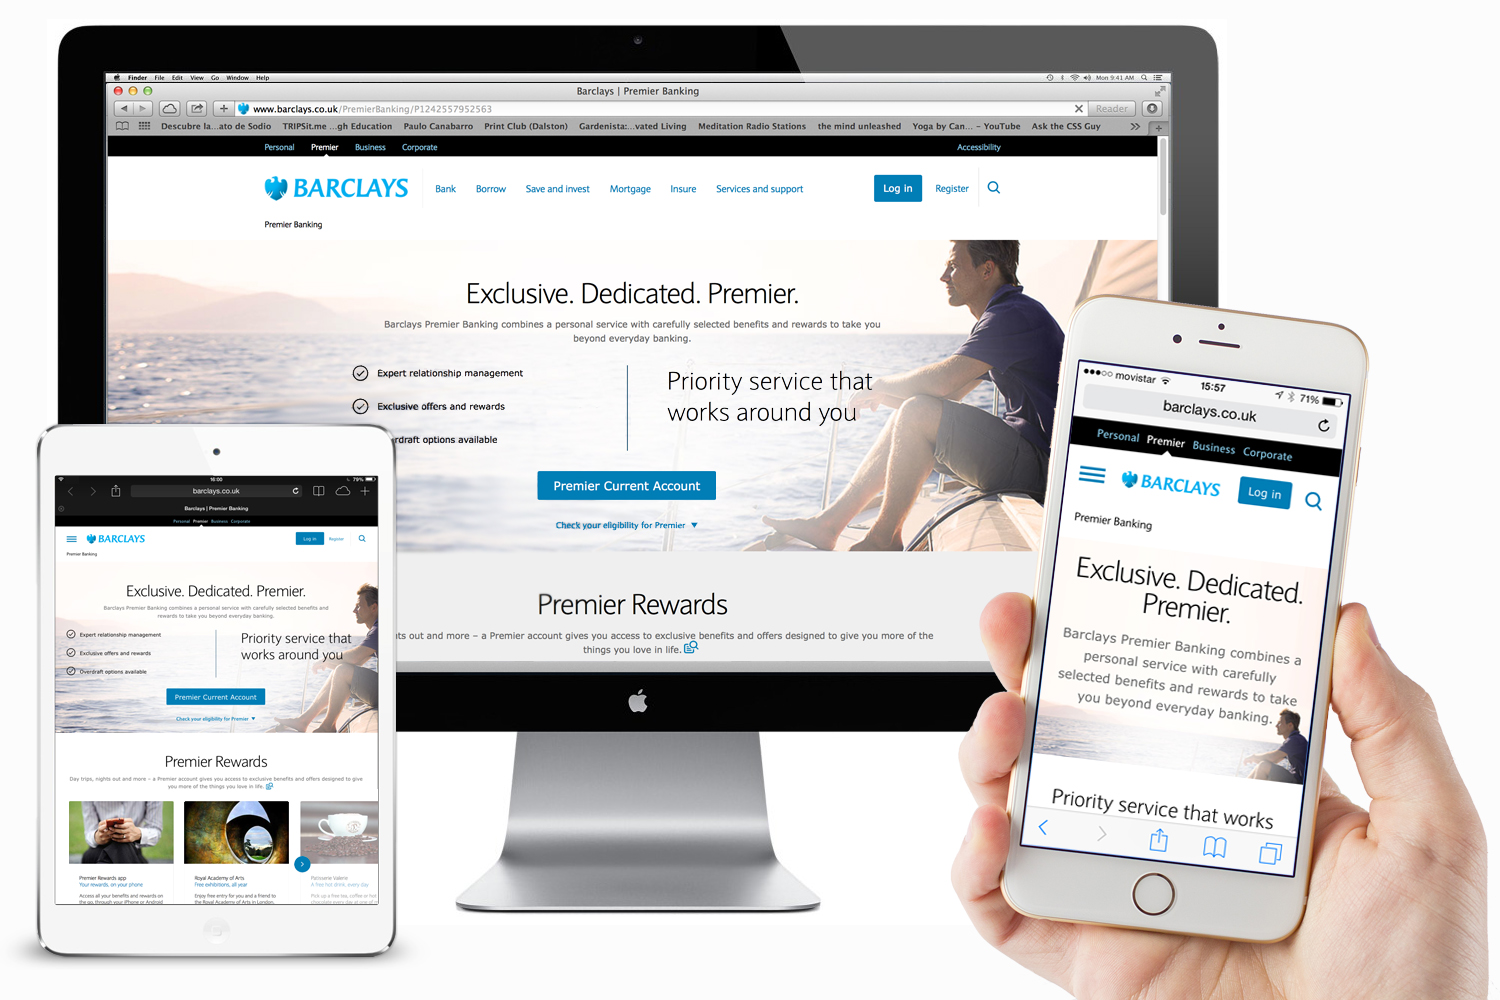  Final look and feel of the new barclays.co.uk branding across&nbsp;mobile, tablet and desktop 